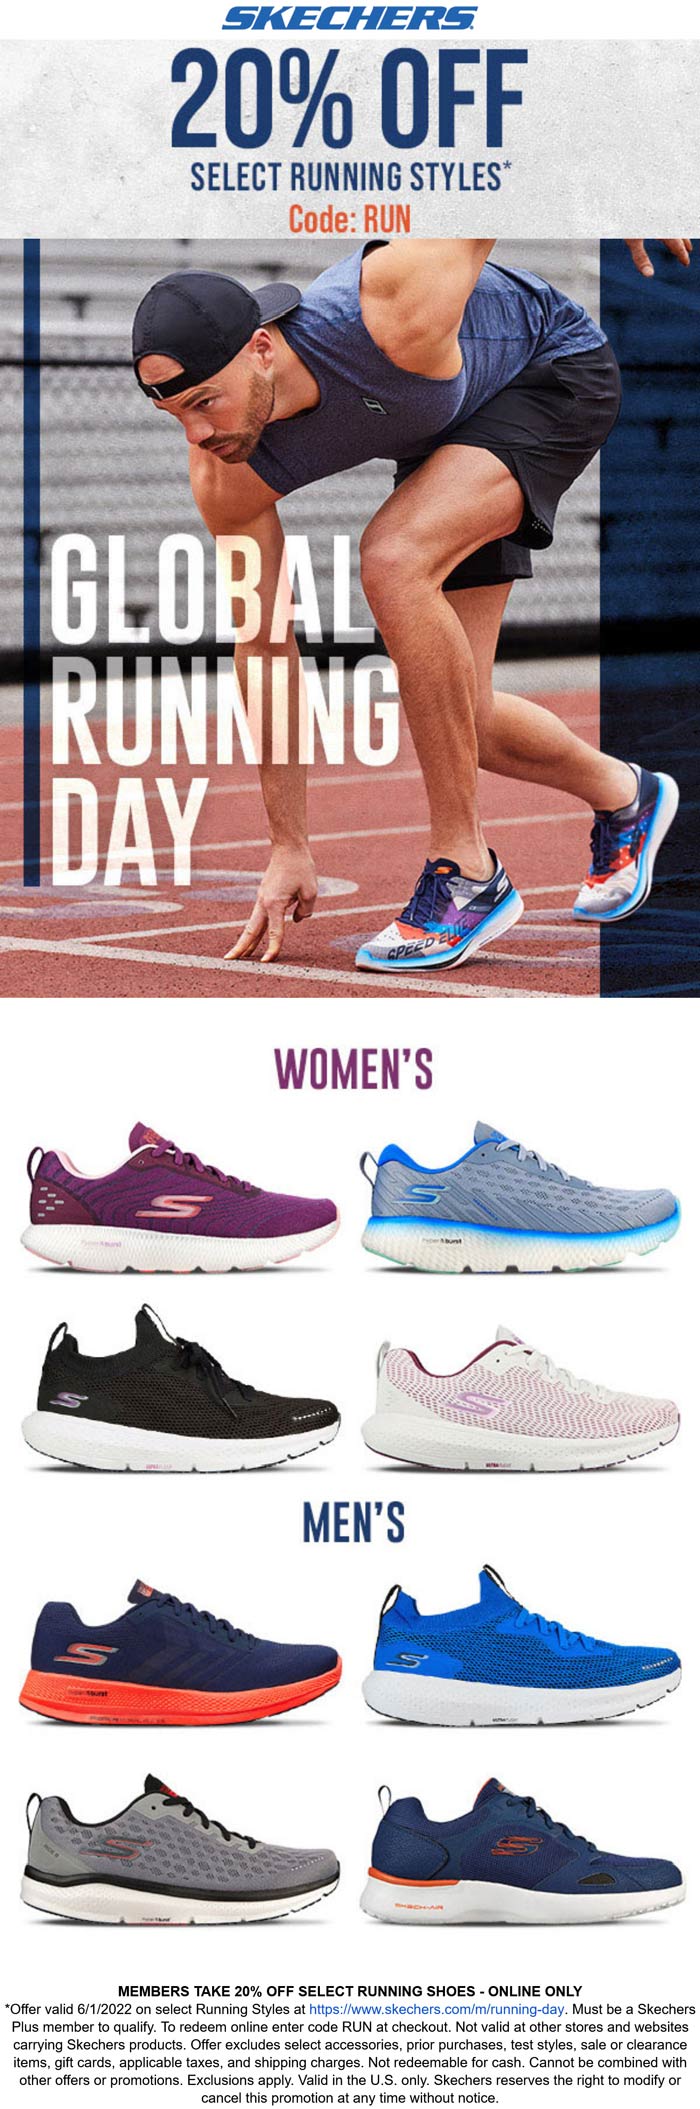 Skechers stores Coupon  20% off running shoes today at Skechers via promo code RUN #skechers 